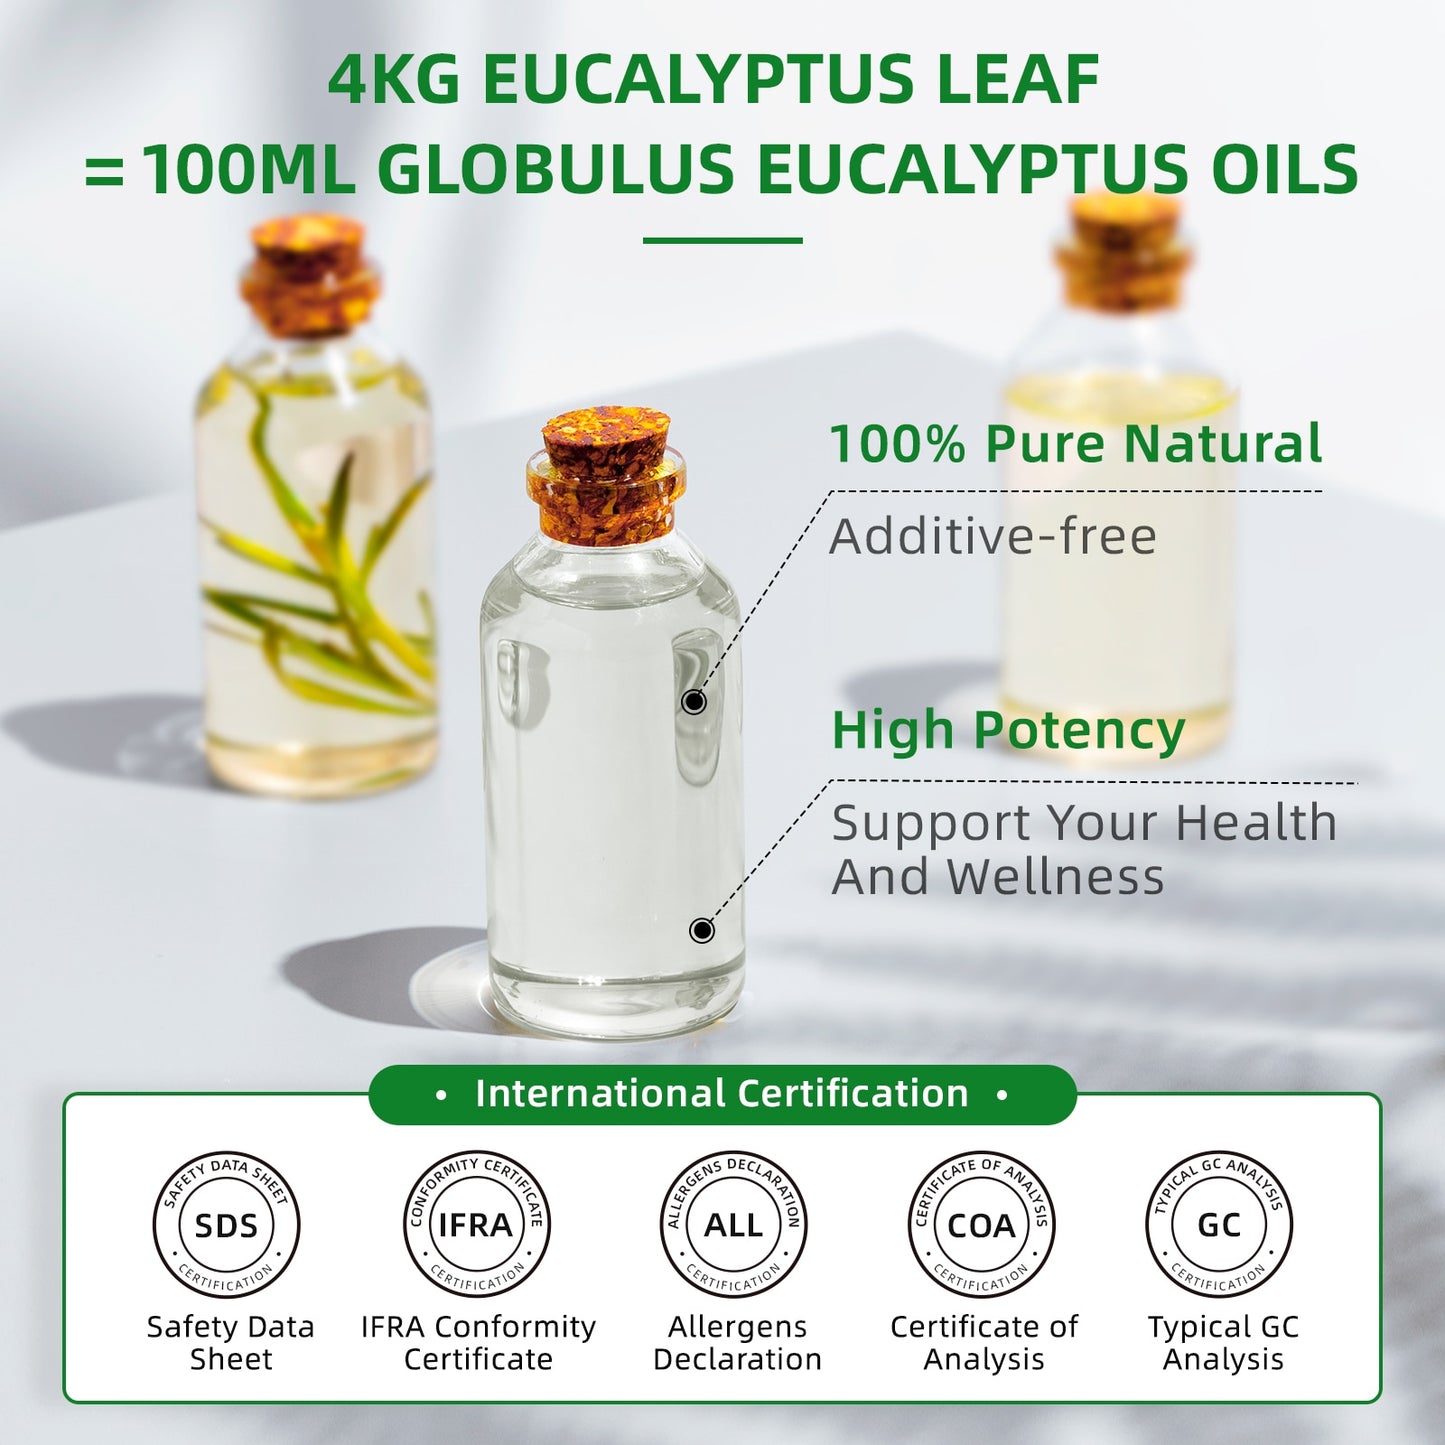 HIQILI 100ML Eucalyptus Essential Oils for Diffuser Humidifier Candle Making Massage Aroma Oil Aromatherapy 100% Pure Natural - youronestopstore23